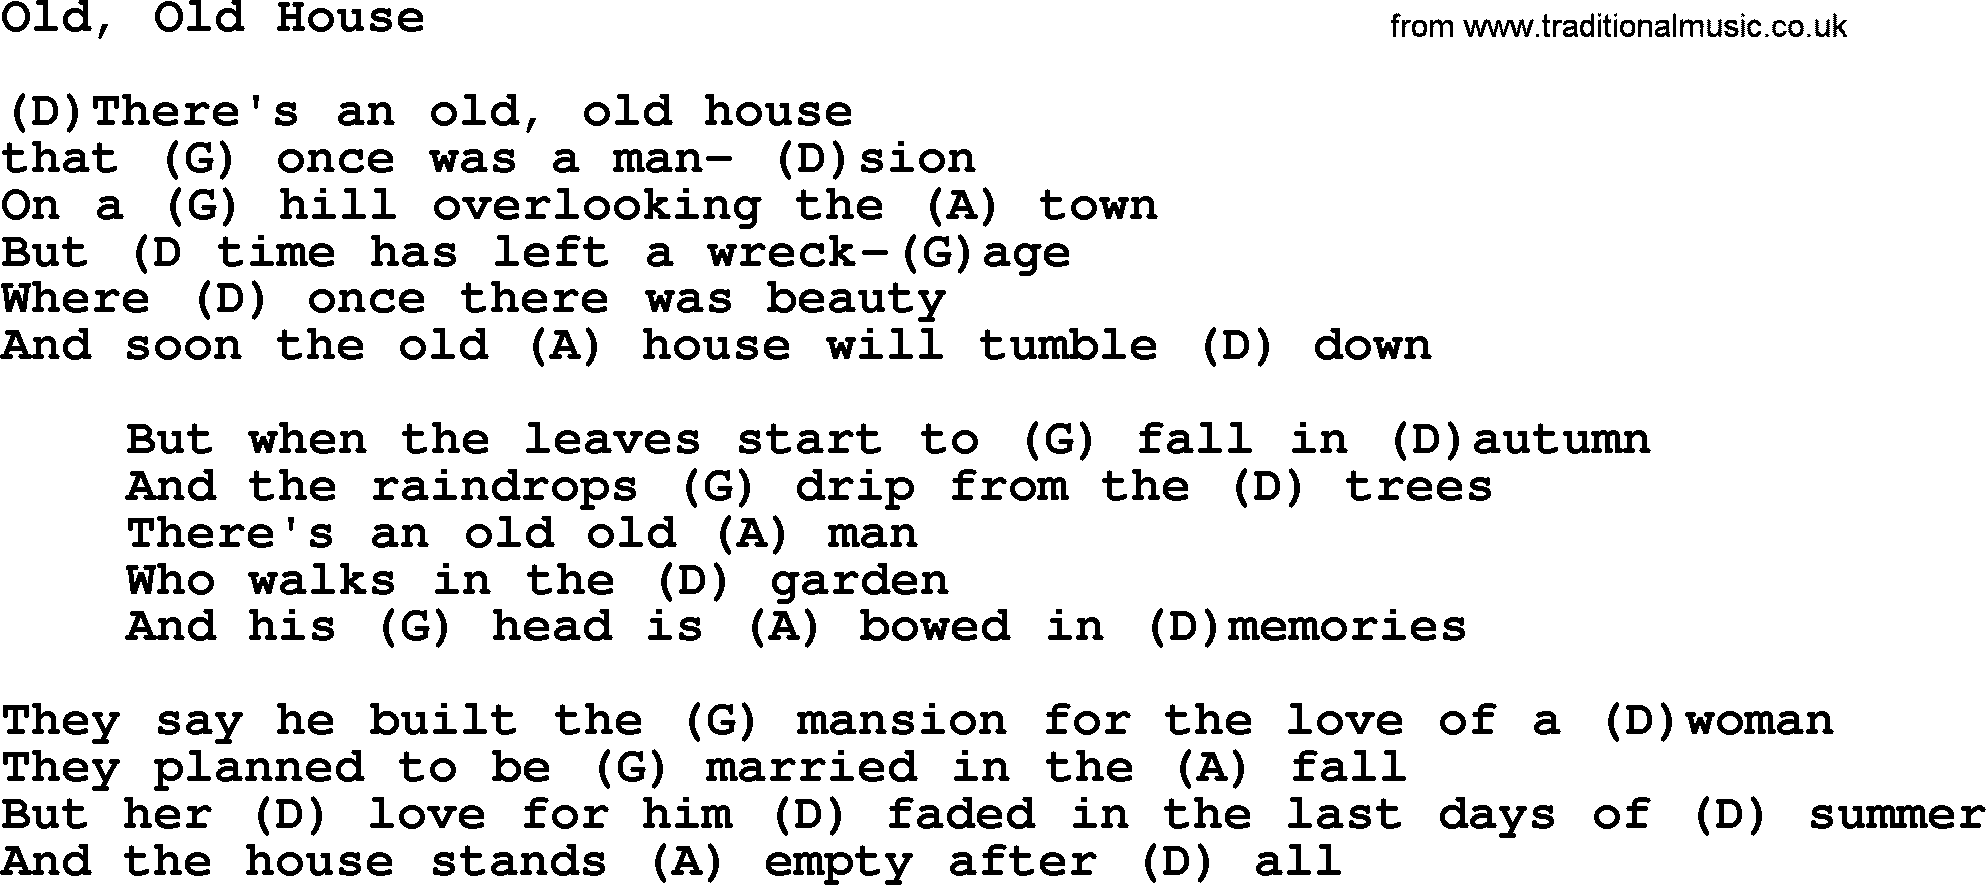 George Jones song: Old, Old House, lyrics and chords